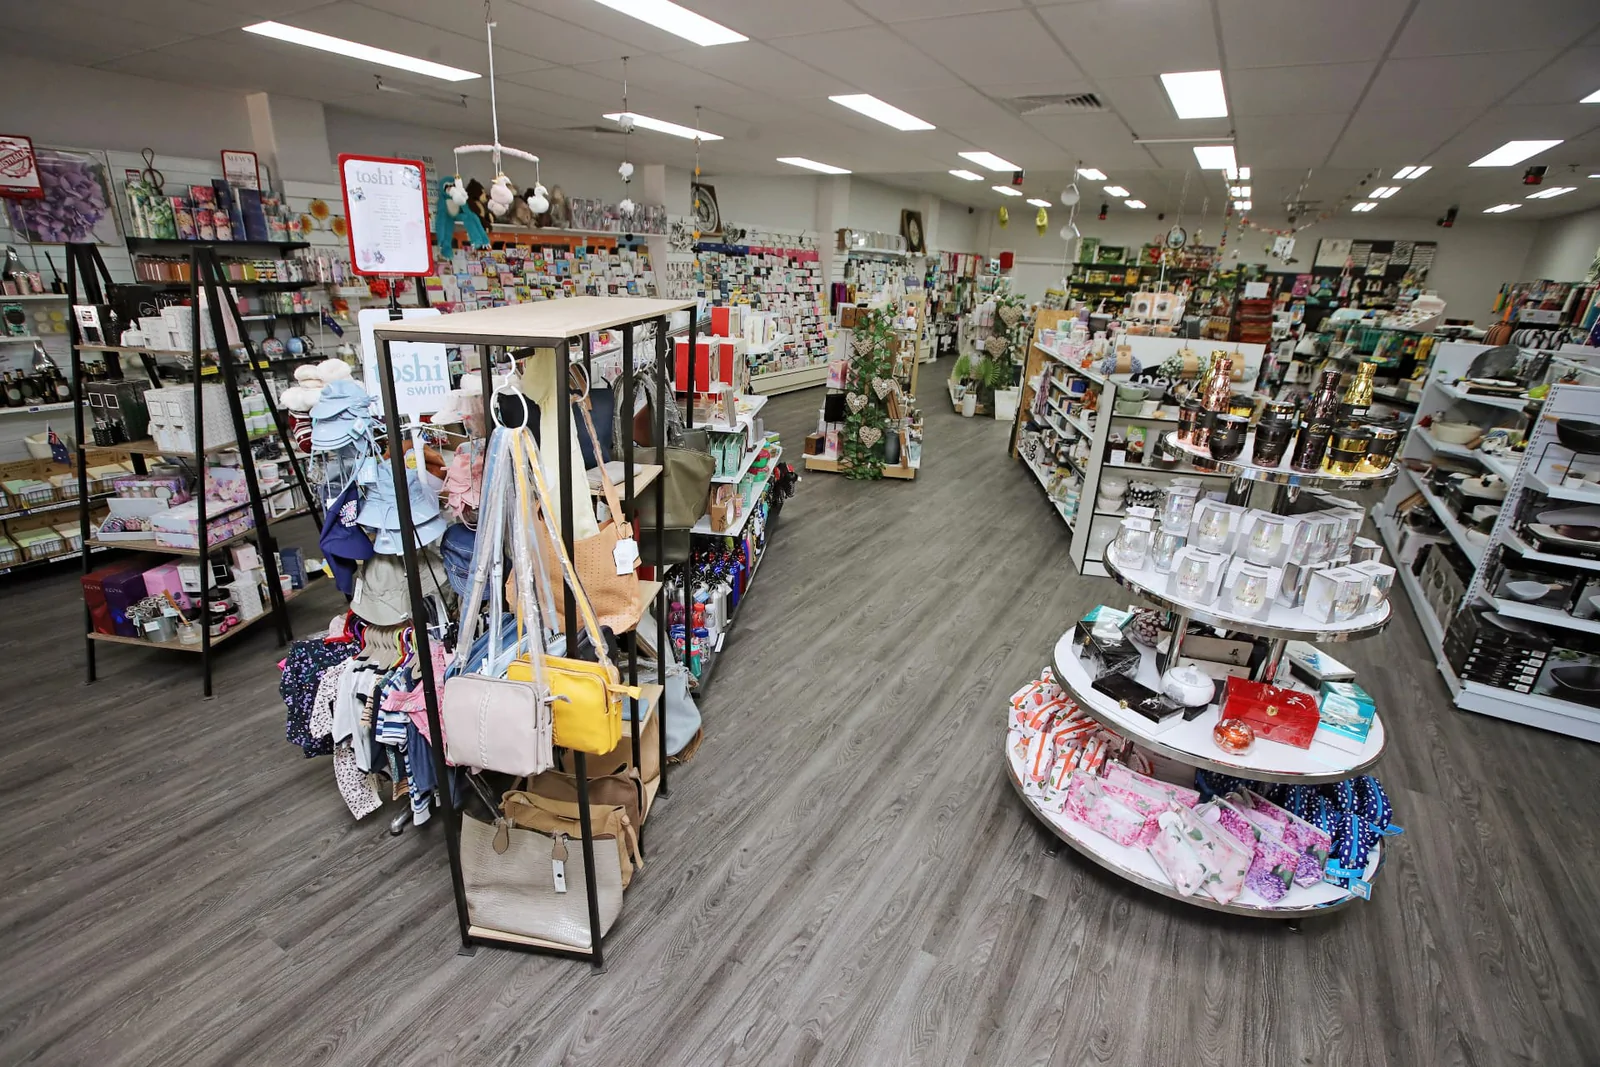 Half of the interior of our recently expanded store. Here you can see our range of apparel, homewares, and gift cards.